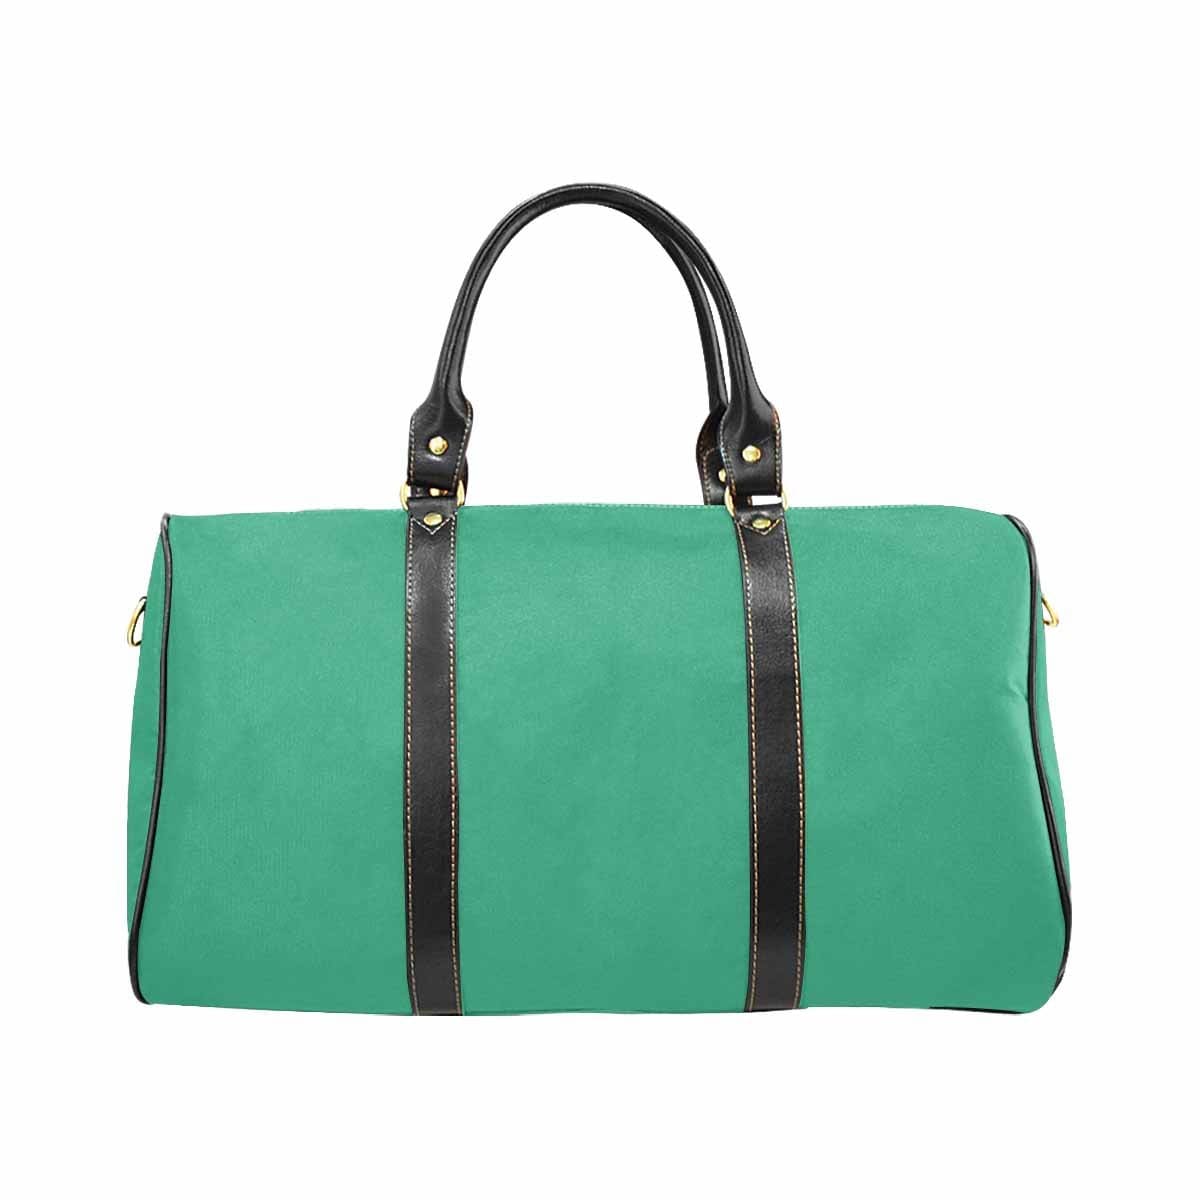 Mint Green Travel Bag Carry On Luggage Adjustable Strap Black - Bags | Travel